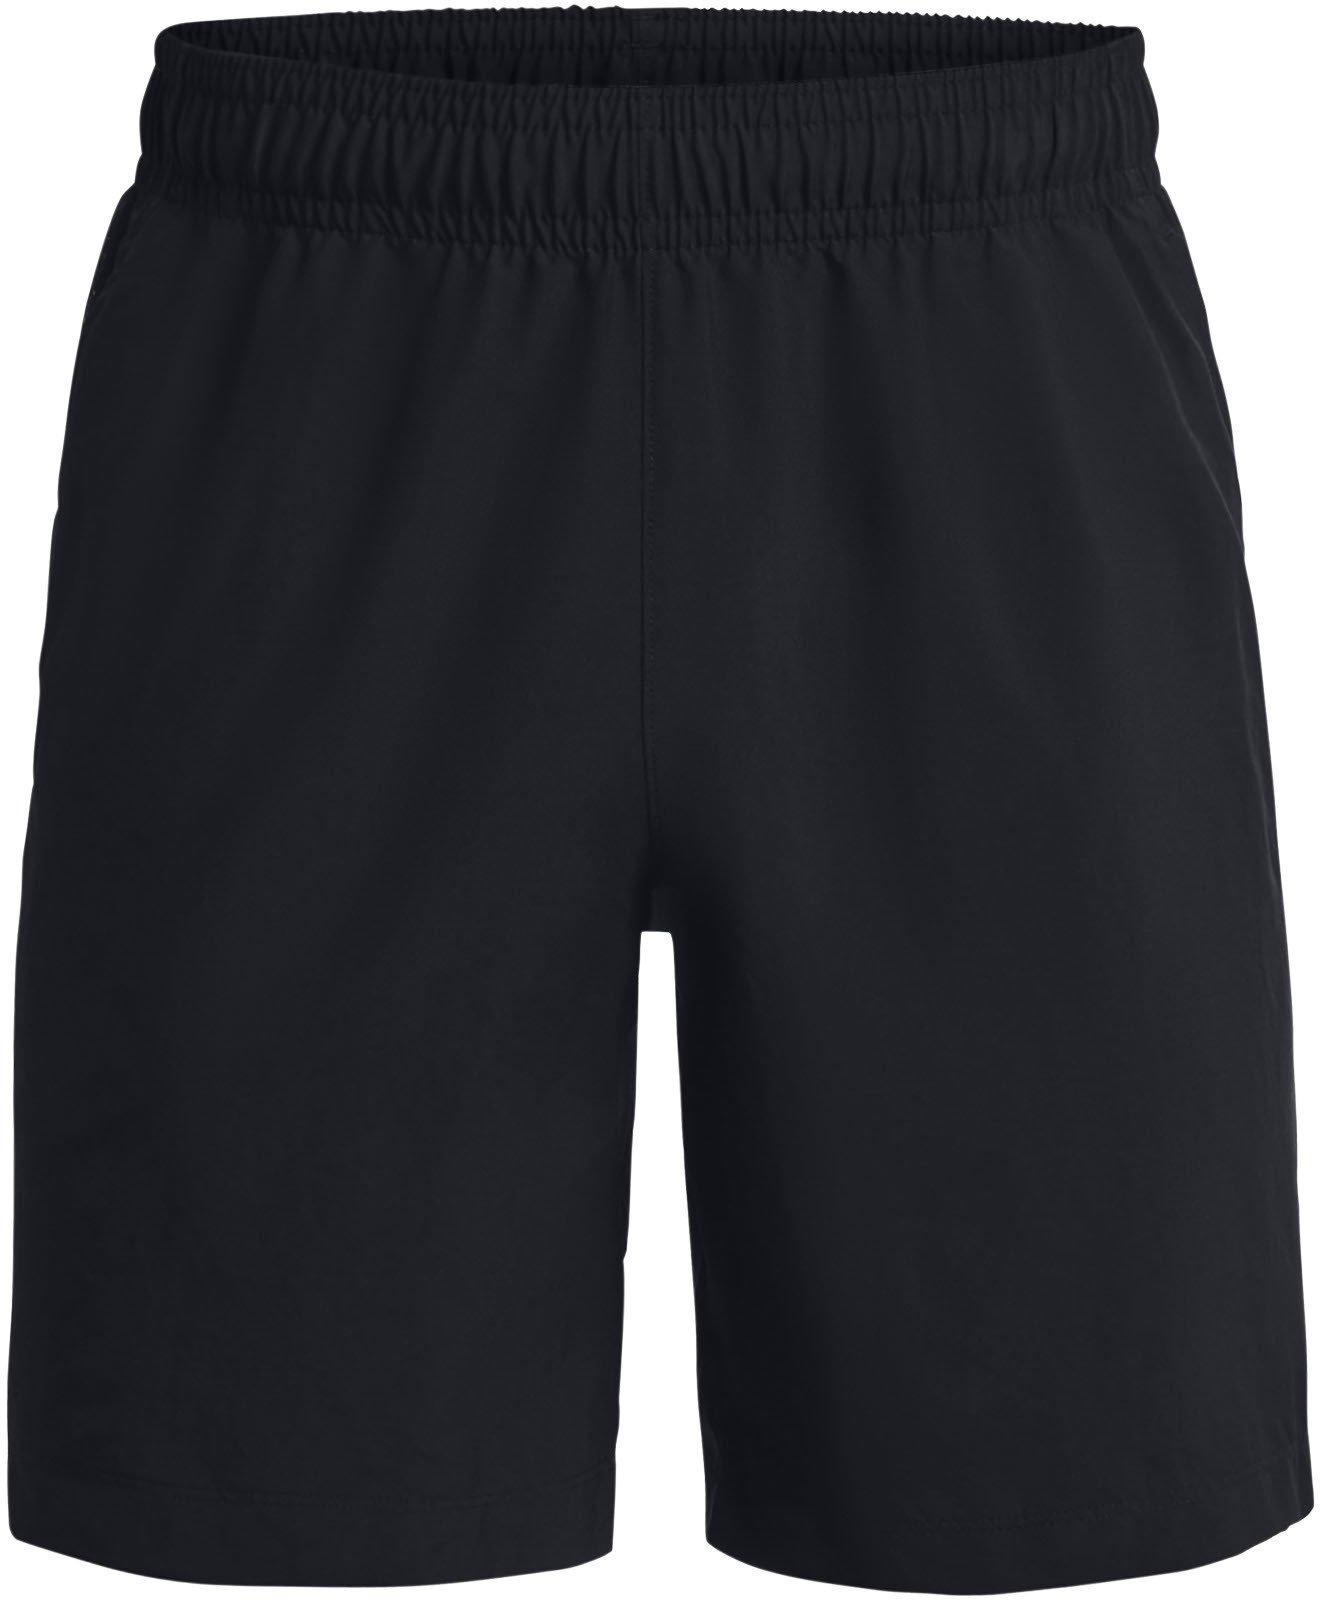 Under Armour Woven Graphic Shorts-BLK 3XL